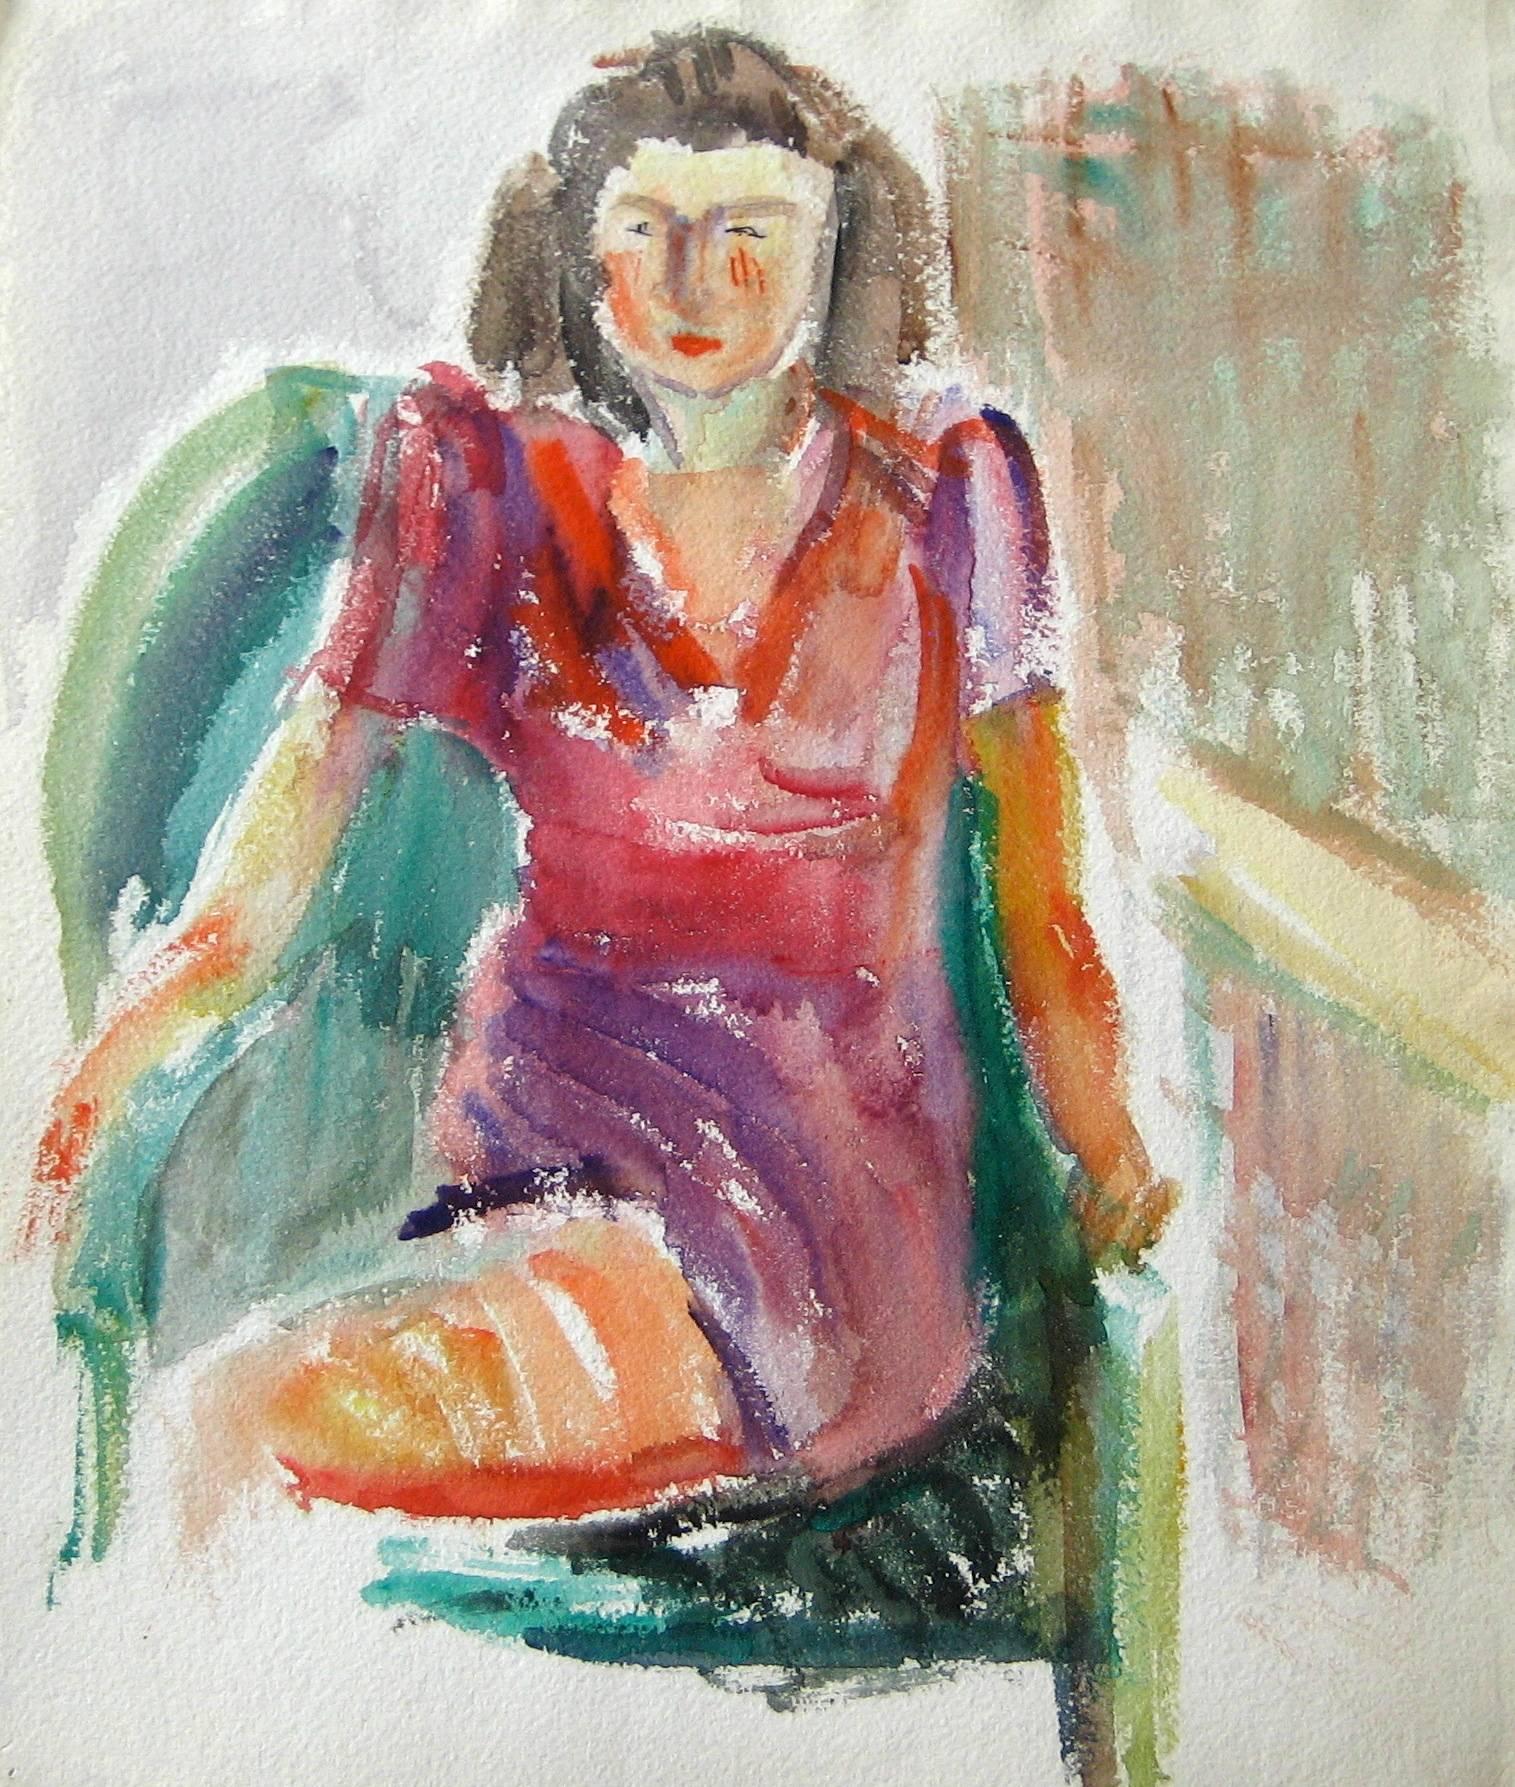 Expressionist Female Portrait in Watercolor, Mid 20th Century - Art by Jennings Tofel